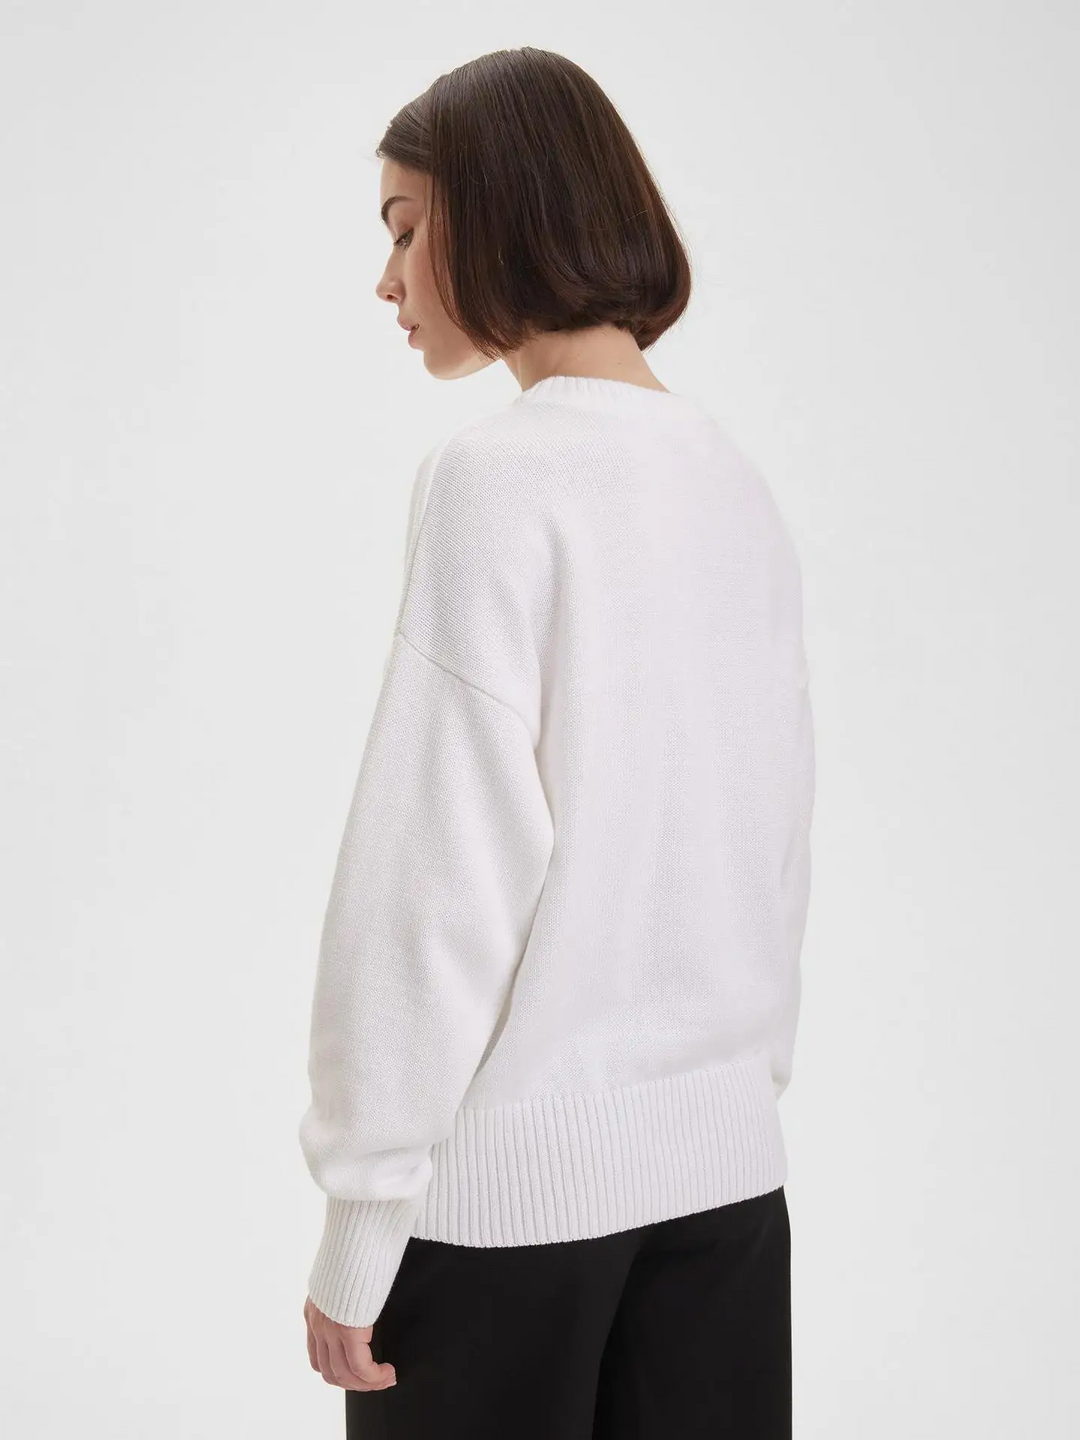 Thick Oversized Pullover "Autumn"